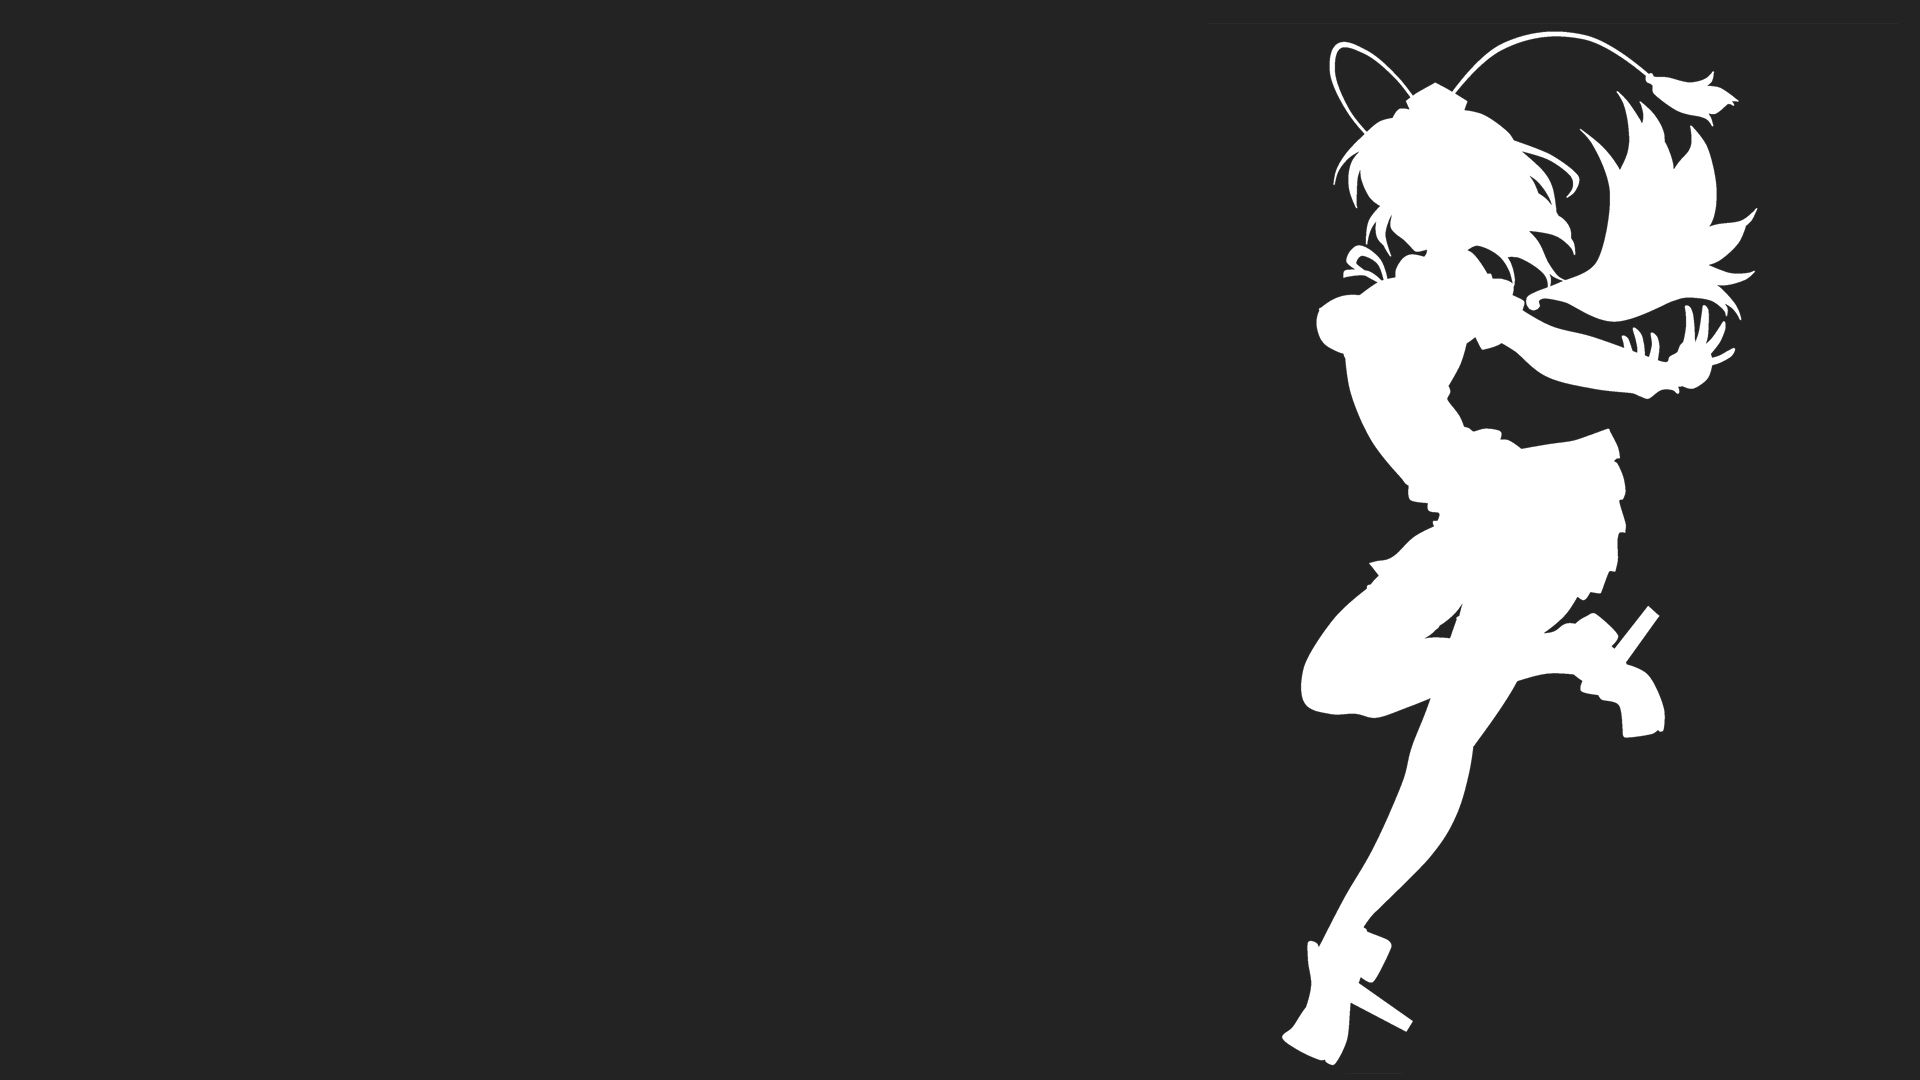 Anime Silhouette Wallpapers - Wallpaper Cave